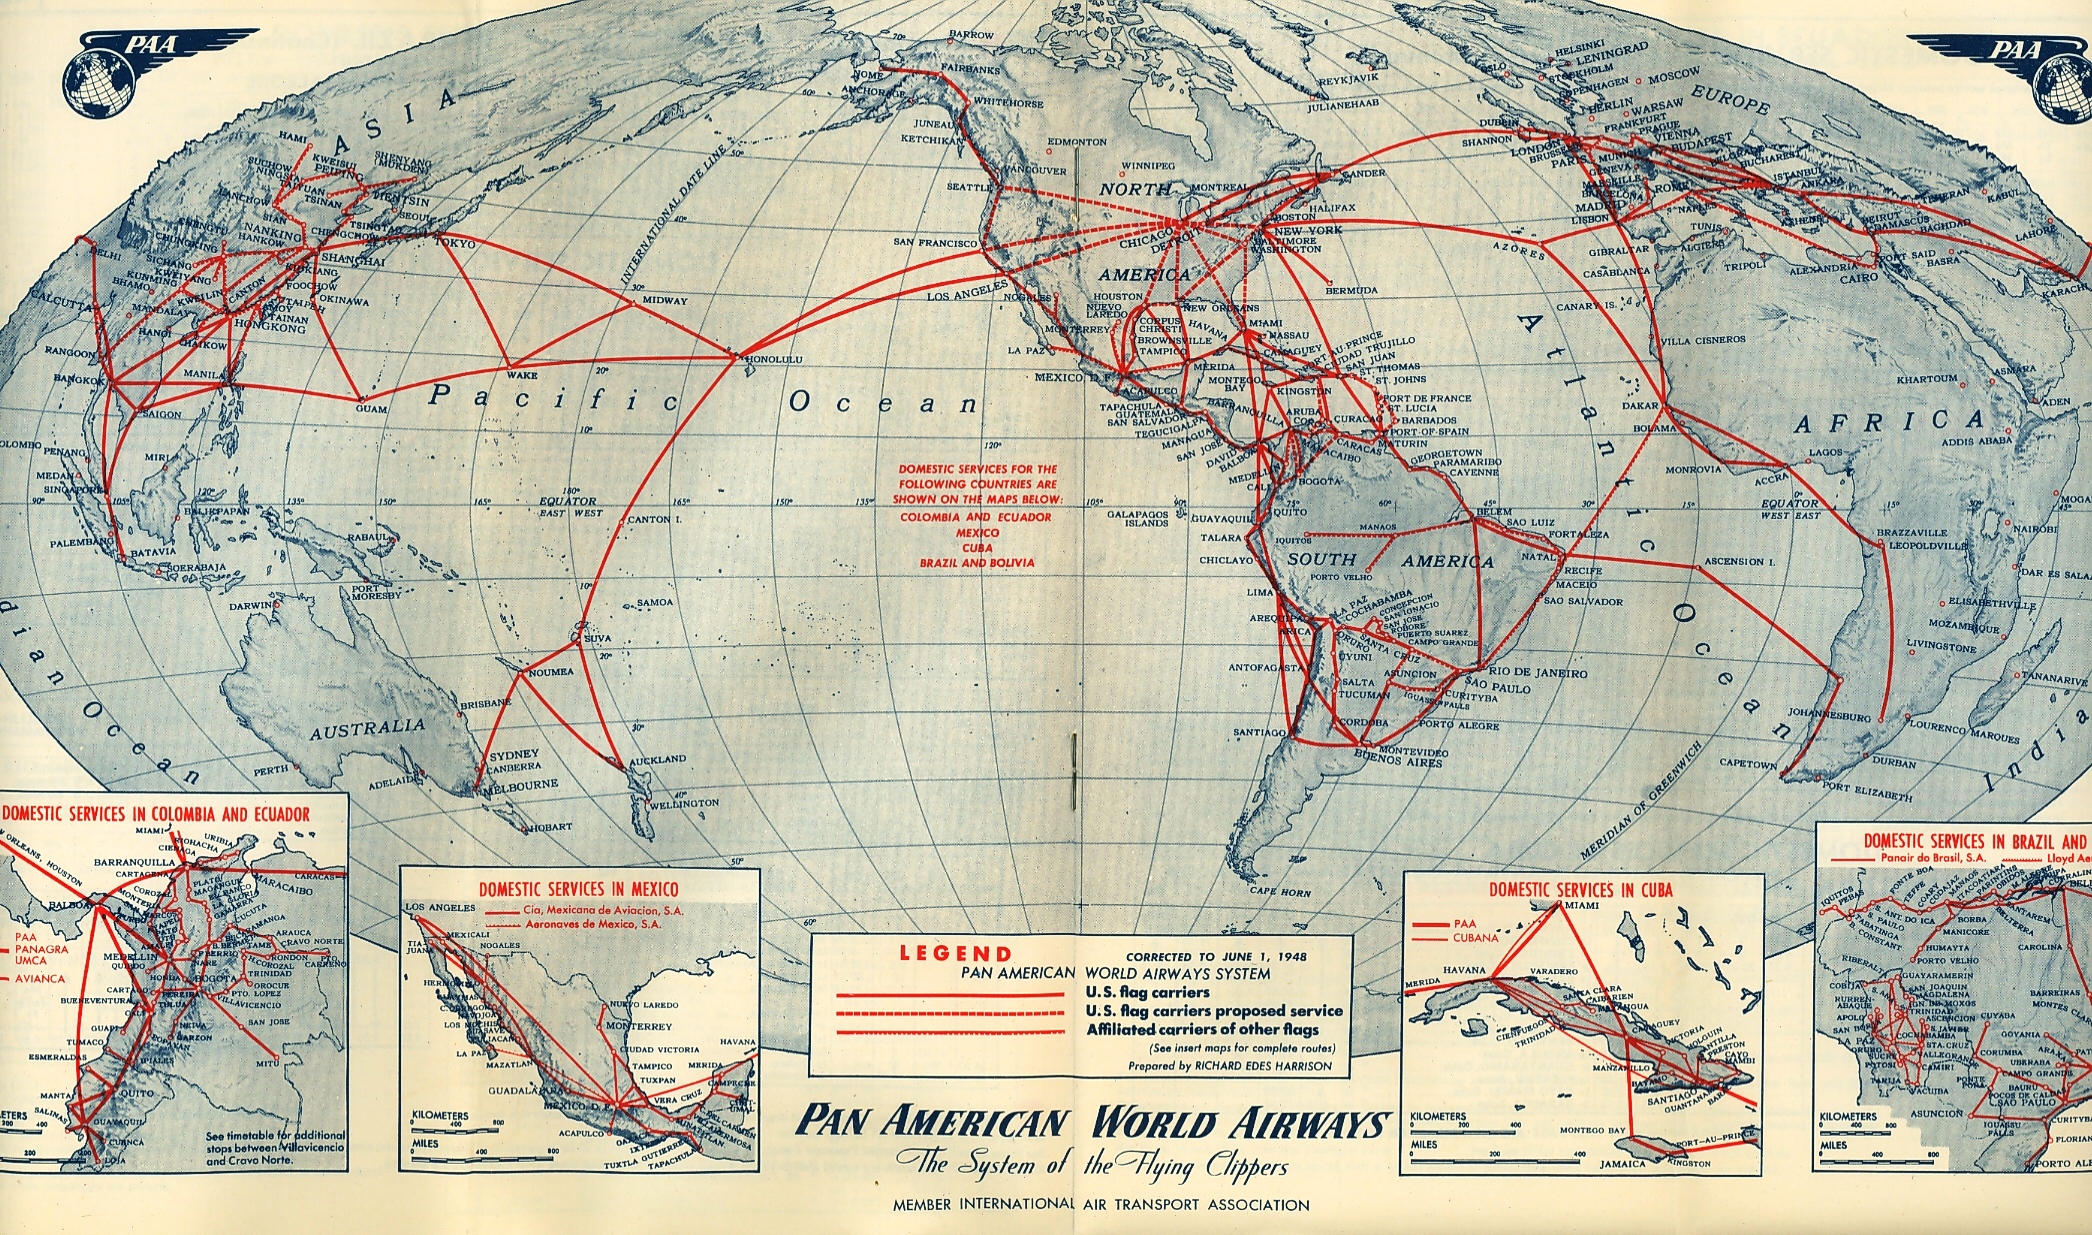 Pan American World Airways – The System of the Flying Clippers